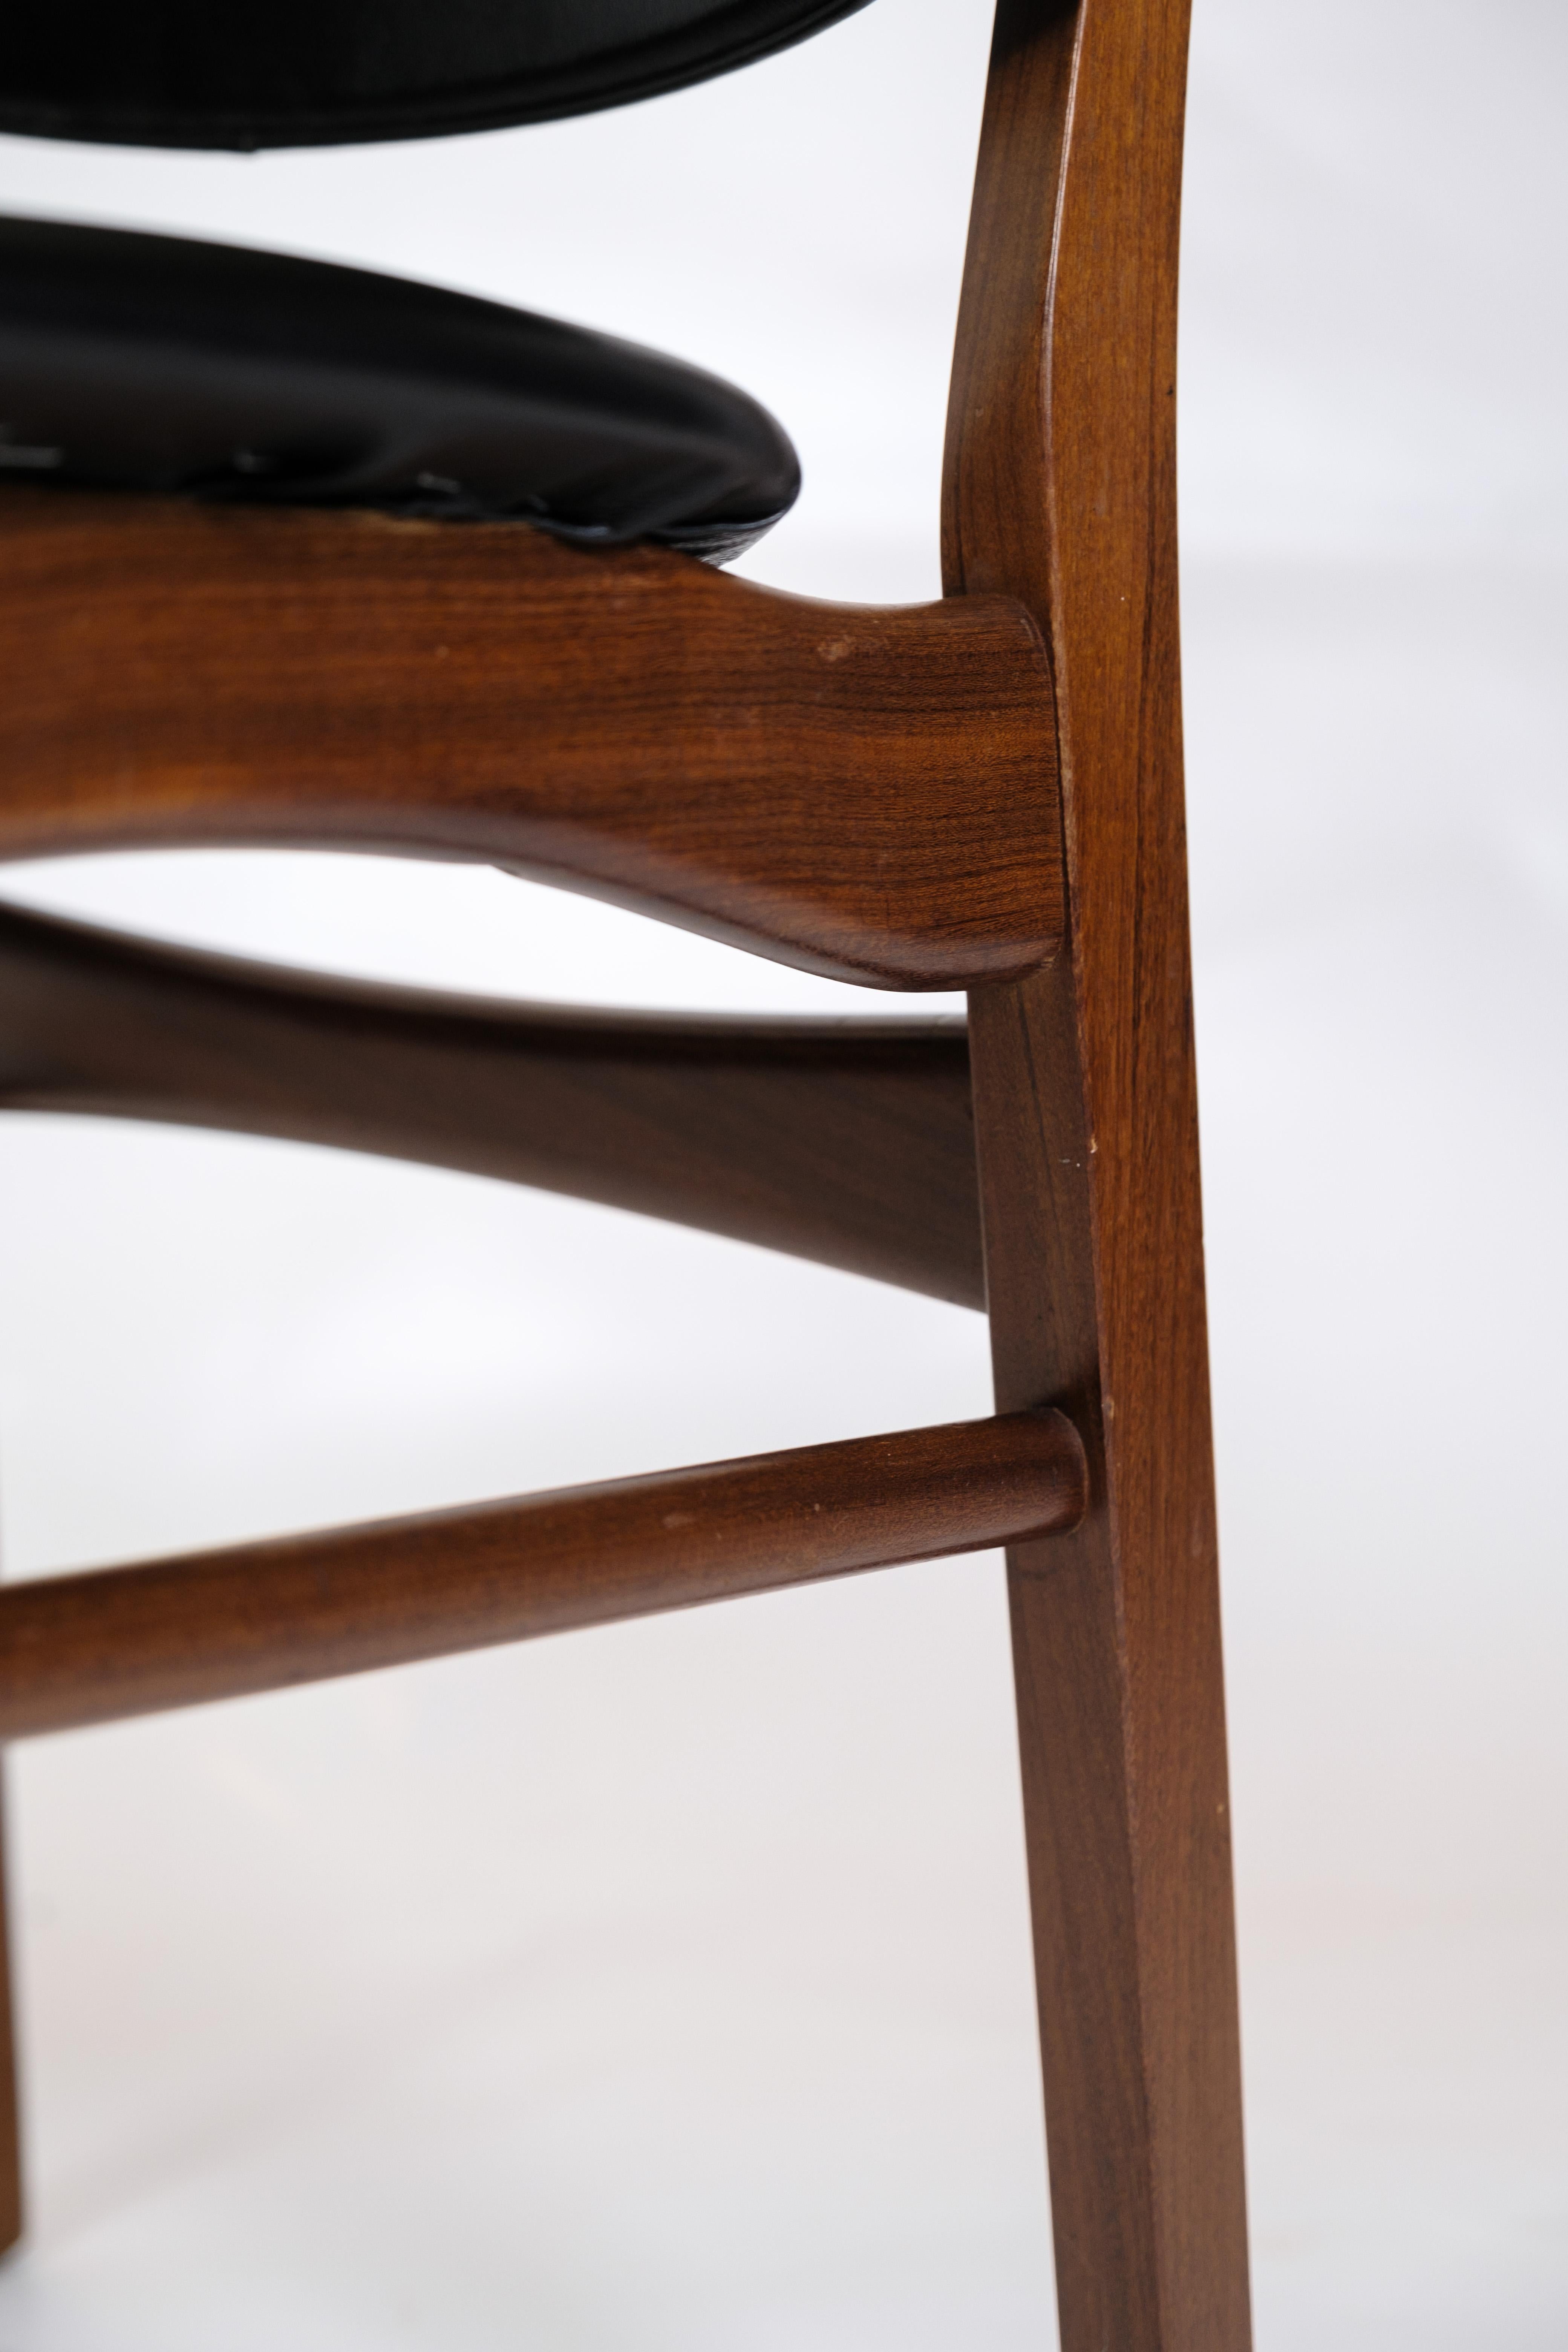  Set of six Teak Dining Chairs by Danish Master Craftsman from 1960s For Sale 1